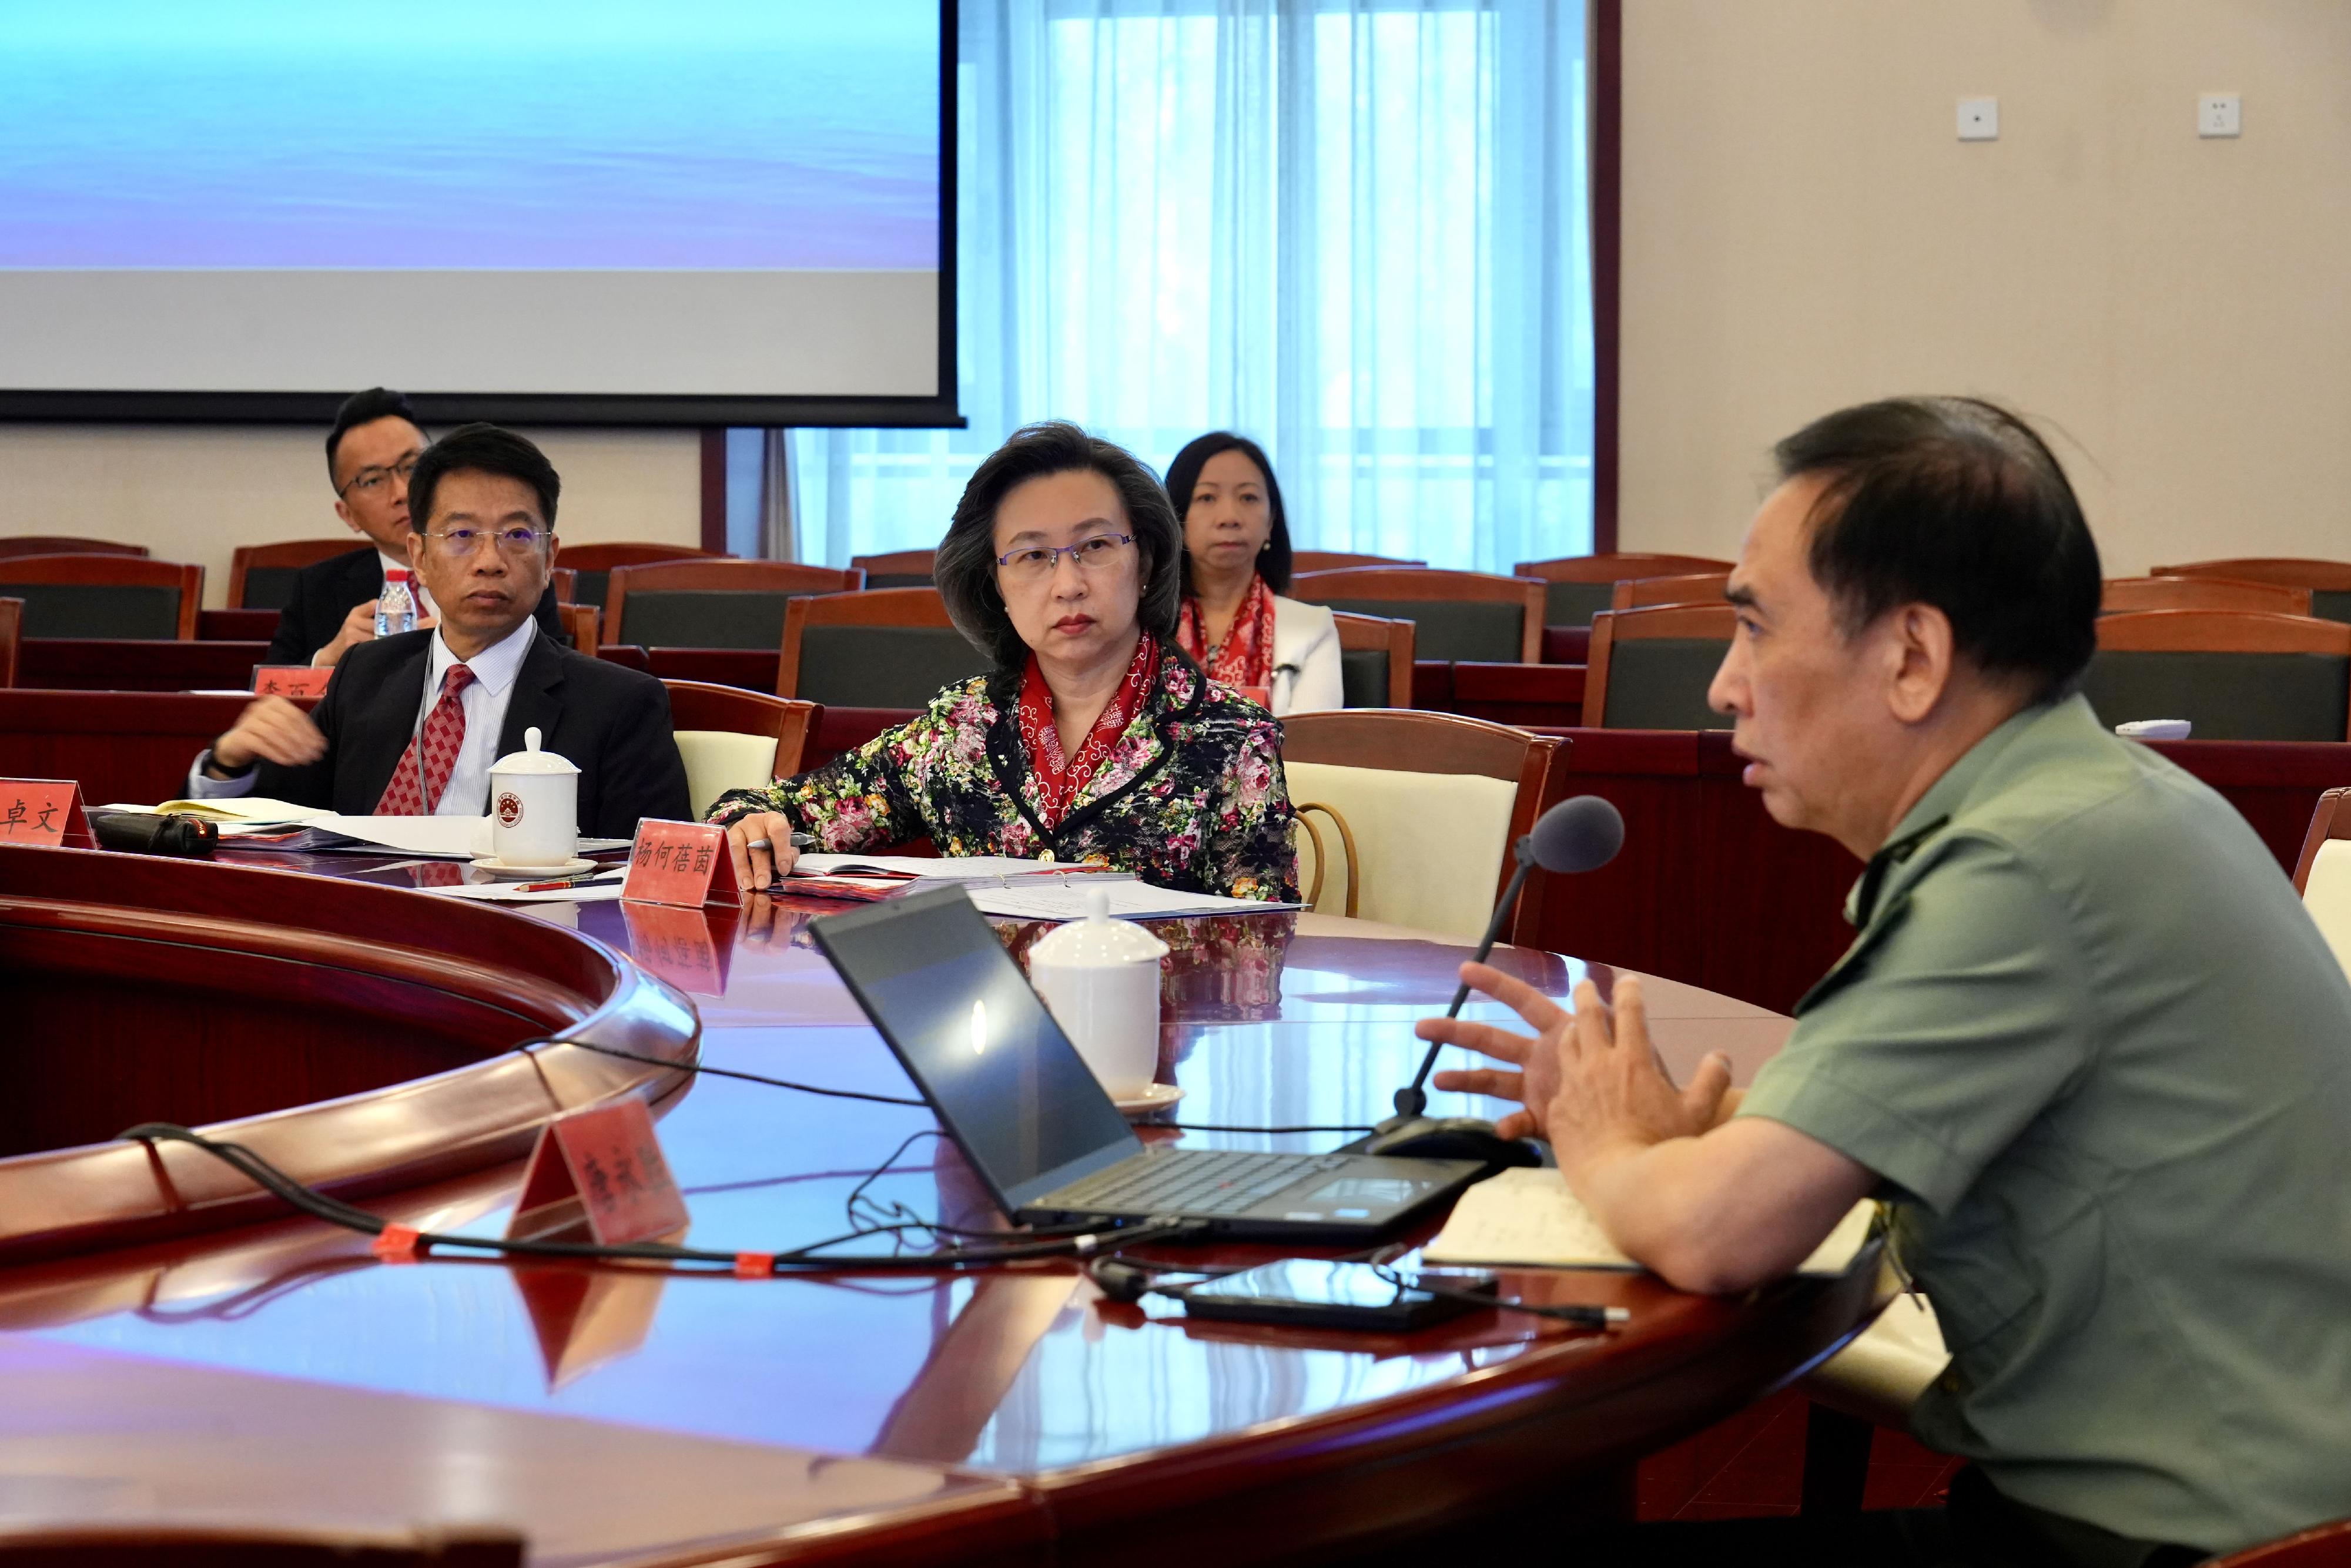 A delegation of HKSAR Government’s Permanent Secretaries and Heads of Departments for study and duty visit started their study programme at the National Academy of Governance this morning (June 26). Vice-dean of National Security College at National Defense University of the People’s Liberation Army, Major General Tang Yongsheng (right), gave a lecture to the participants on national security.